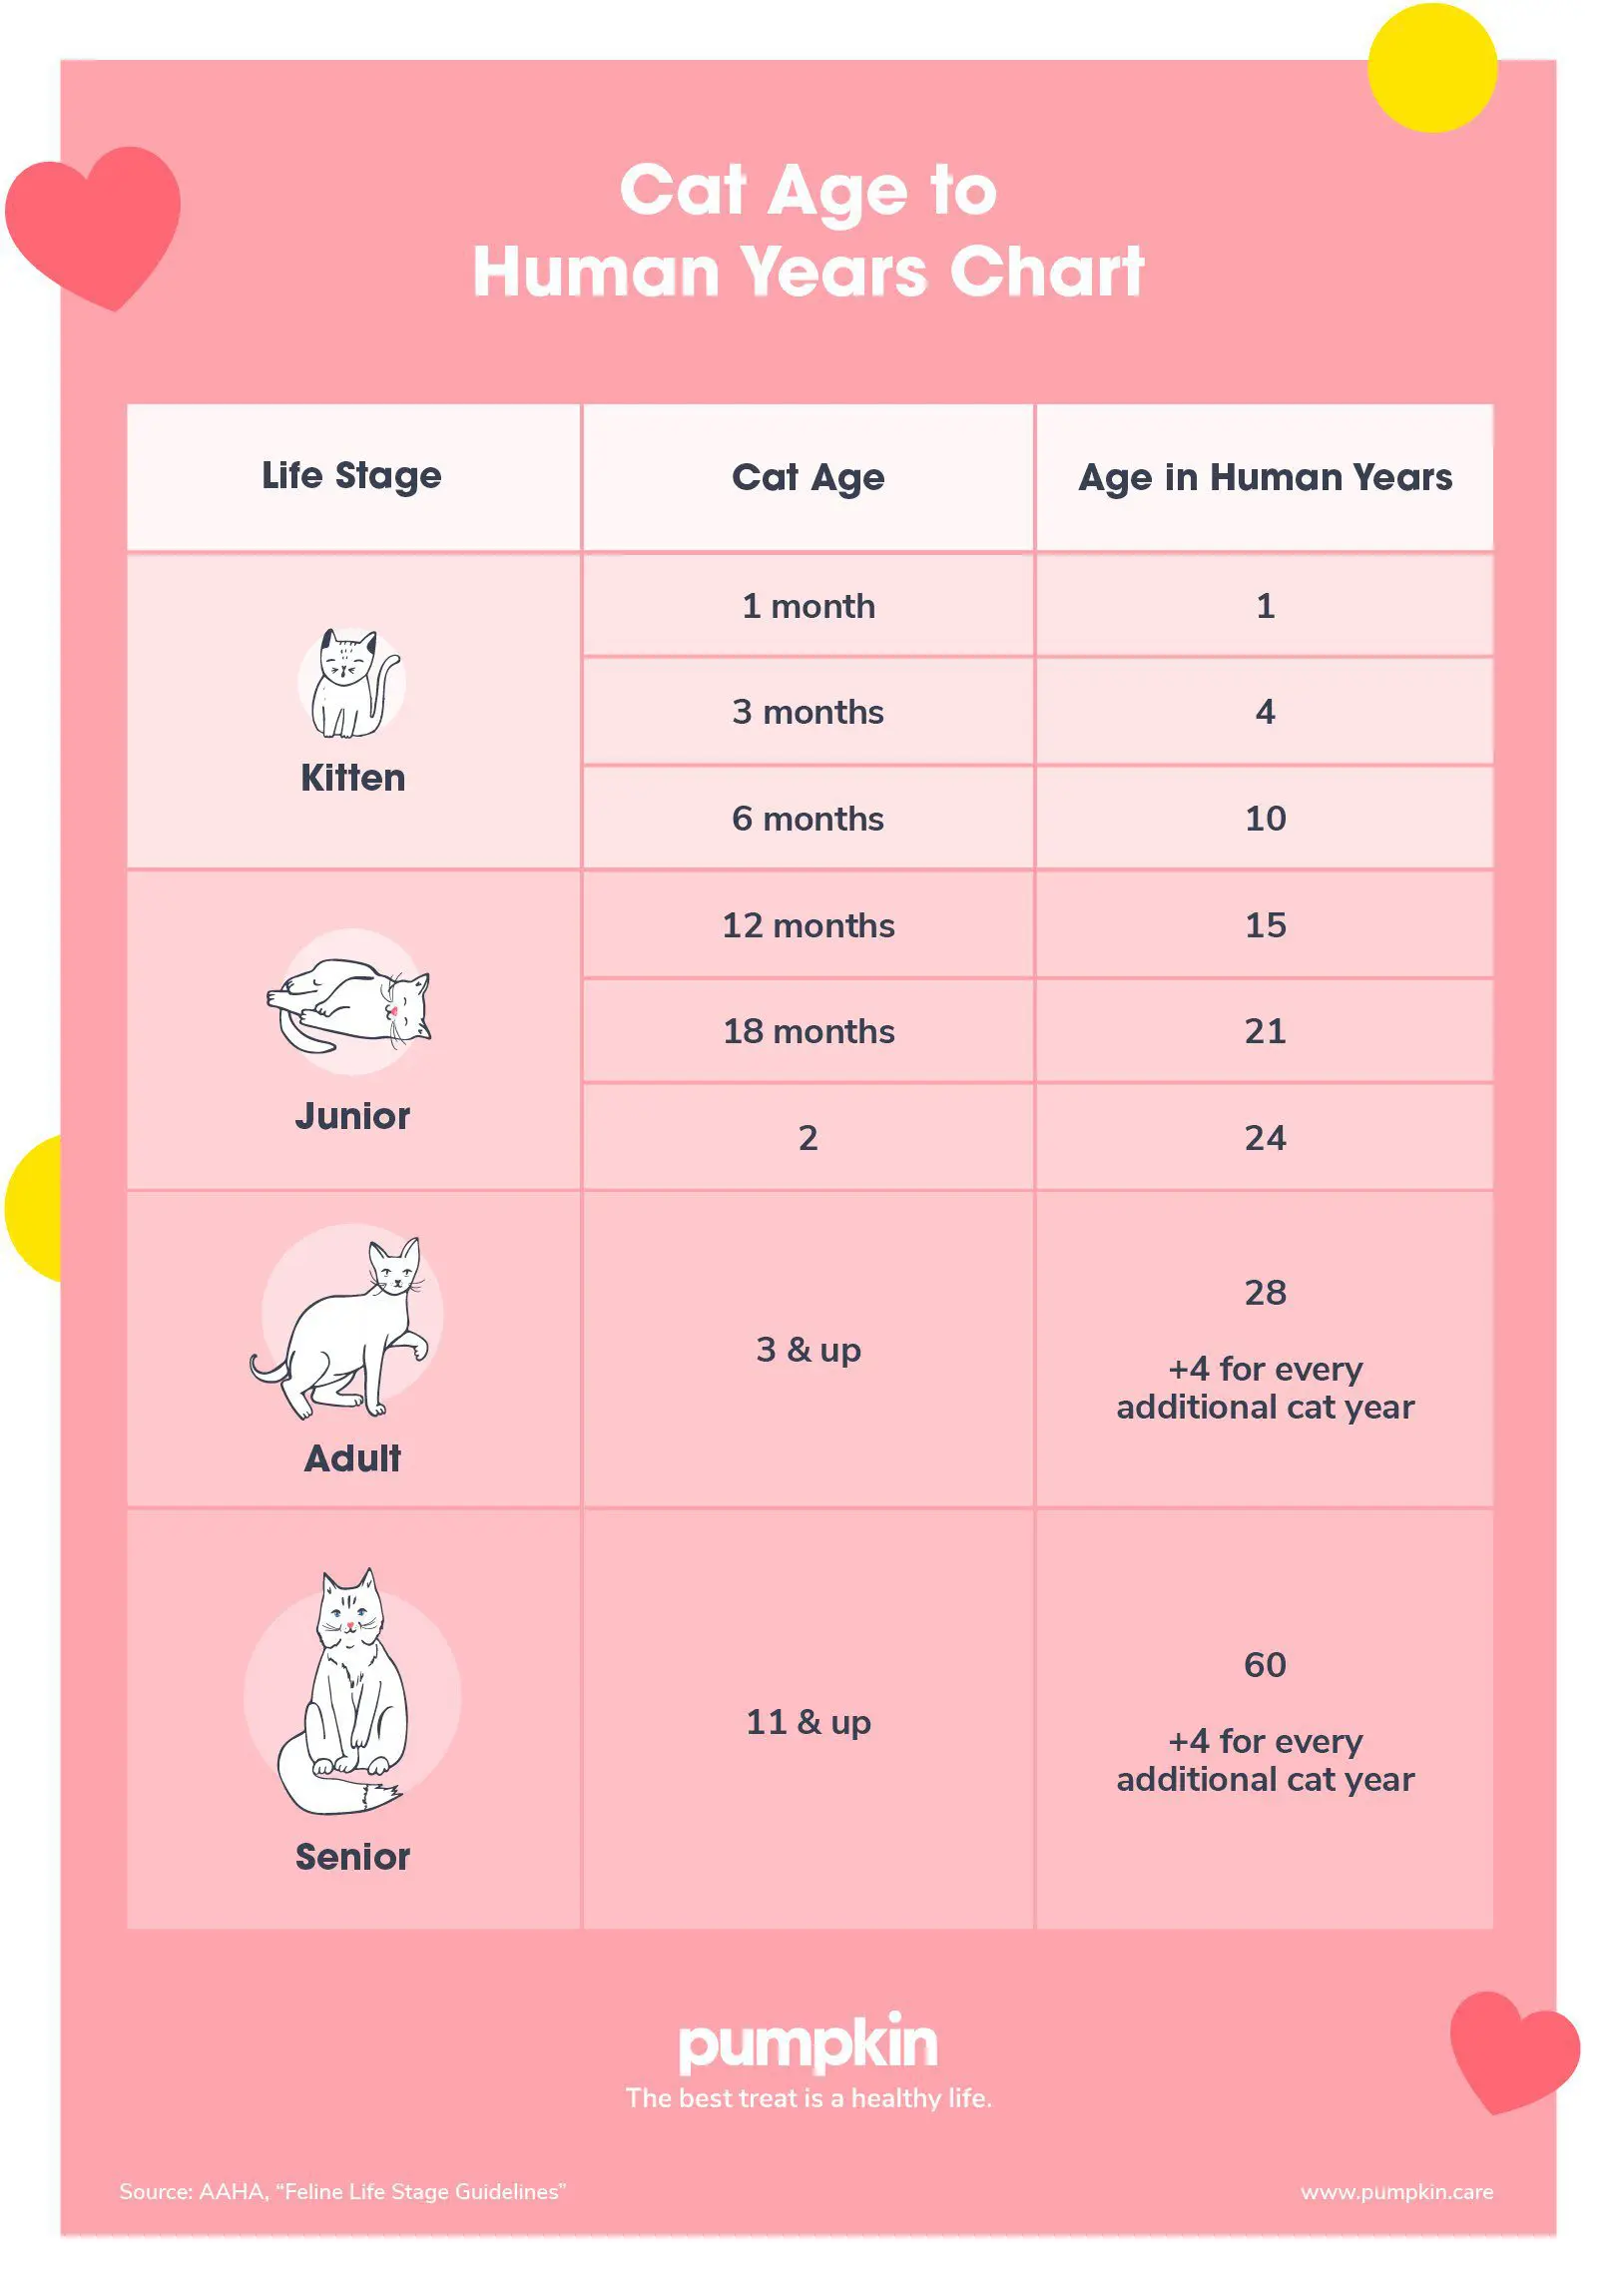 Cat Age Chart: How Old Is Your Cat In Human Years? - Pumpkin®